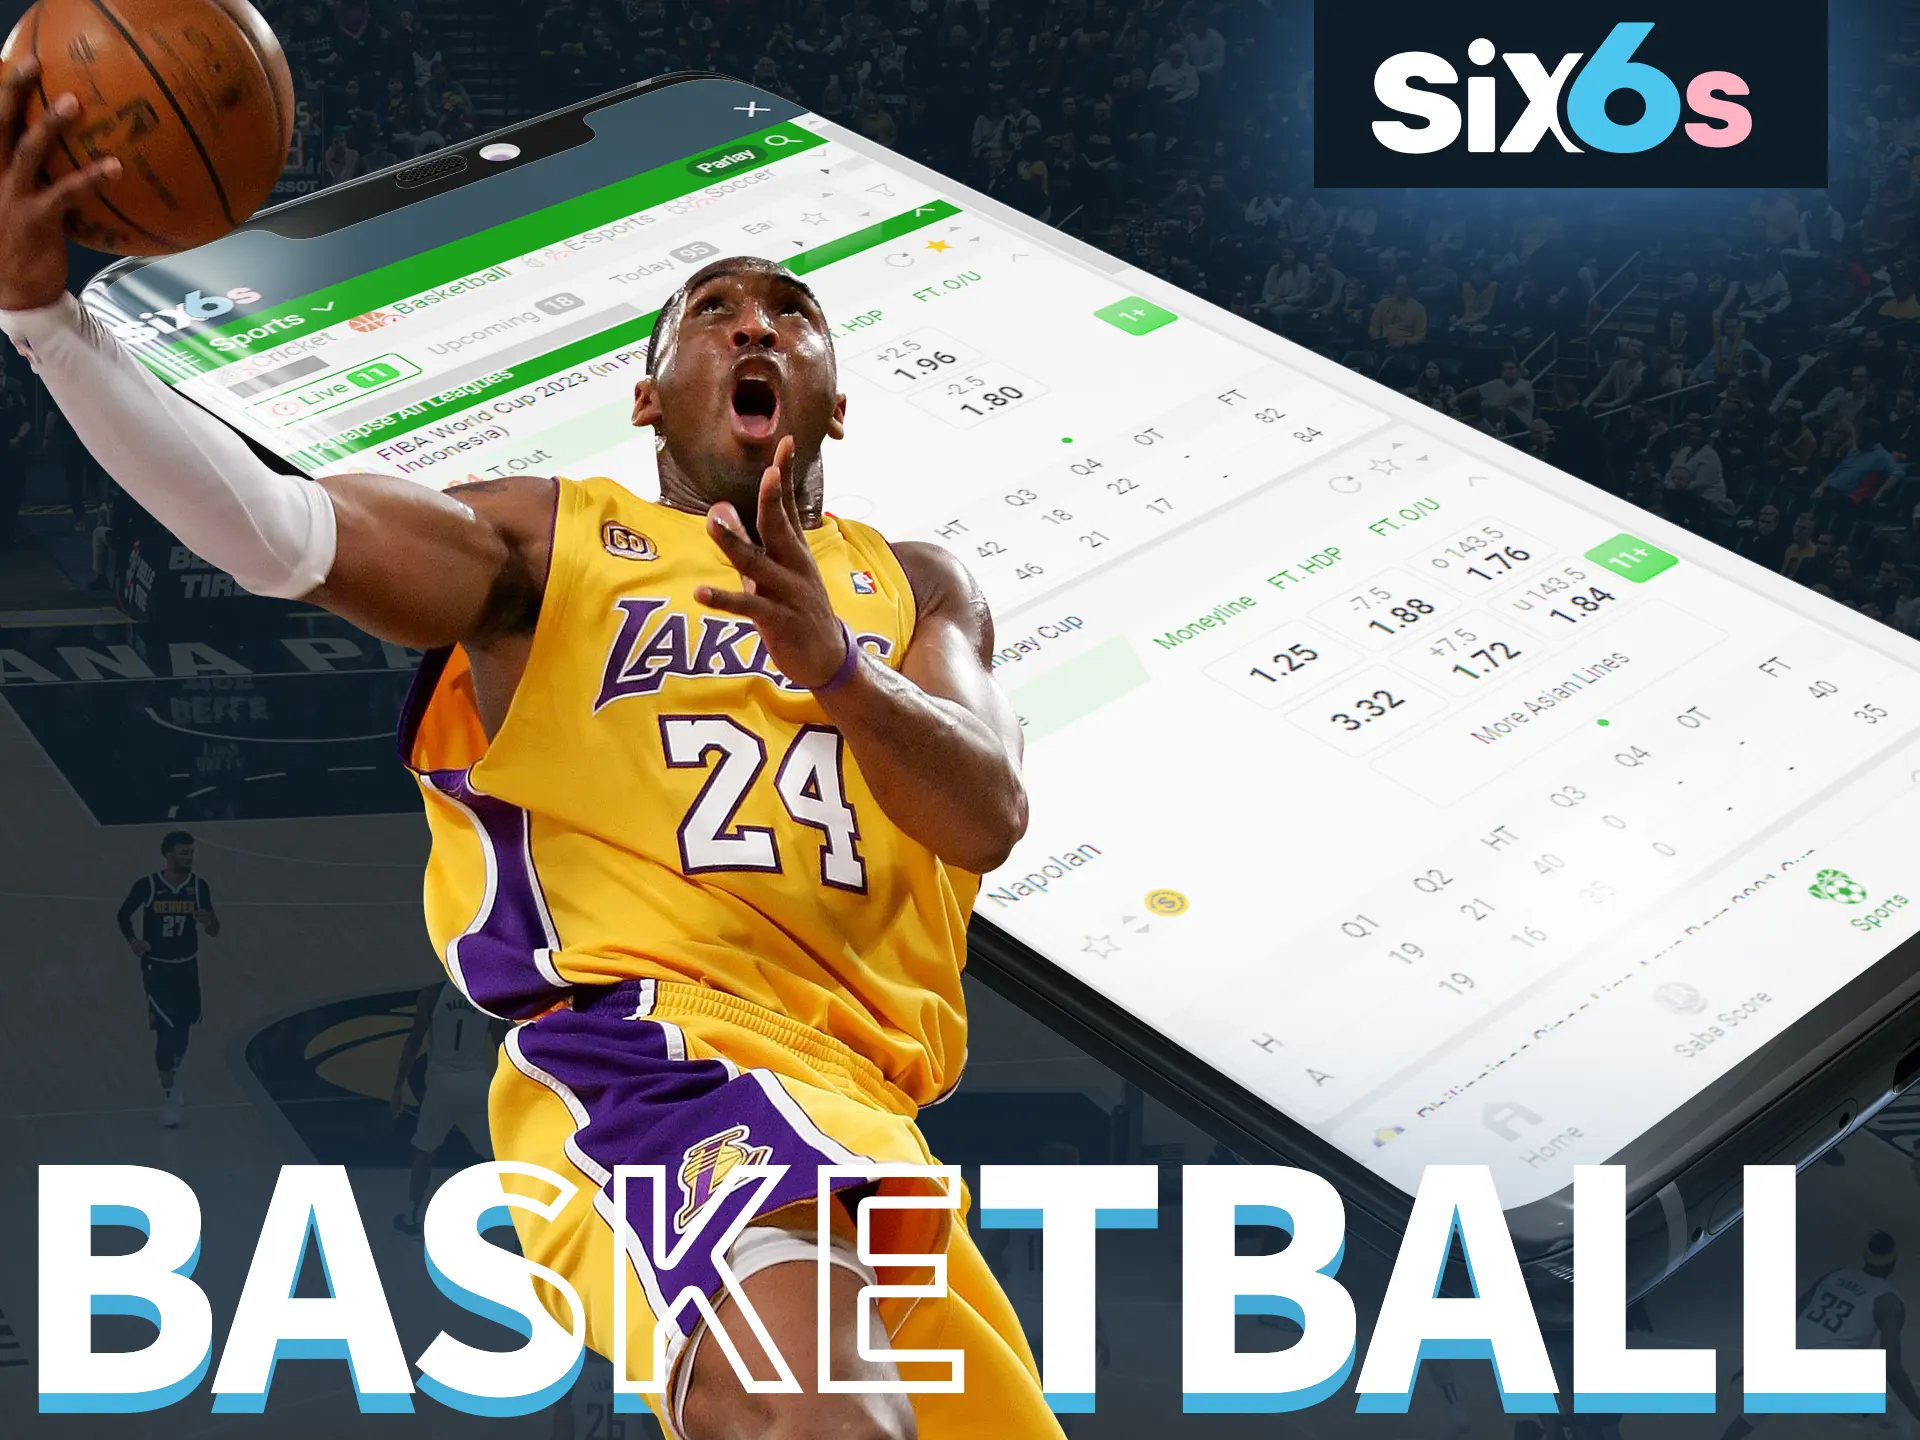 Place bets on basketball with the Six6s website.